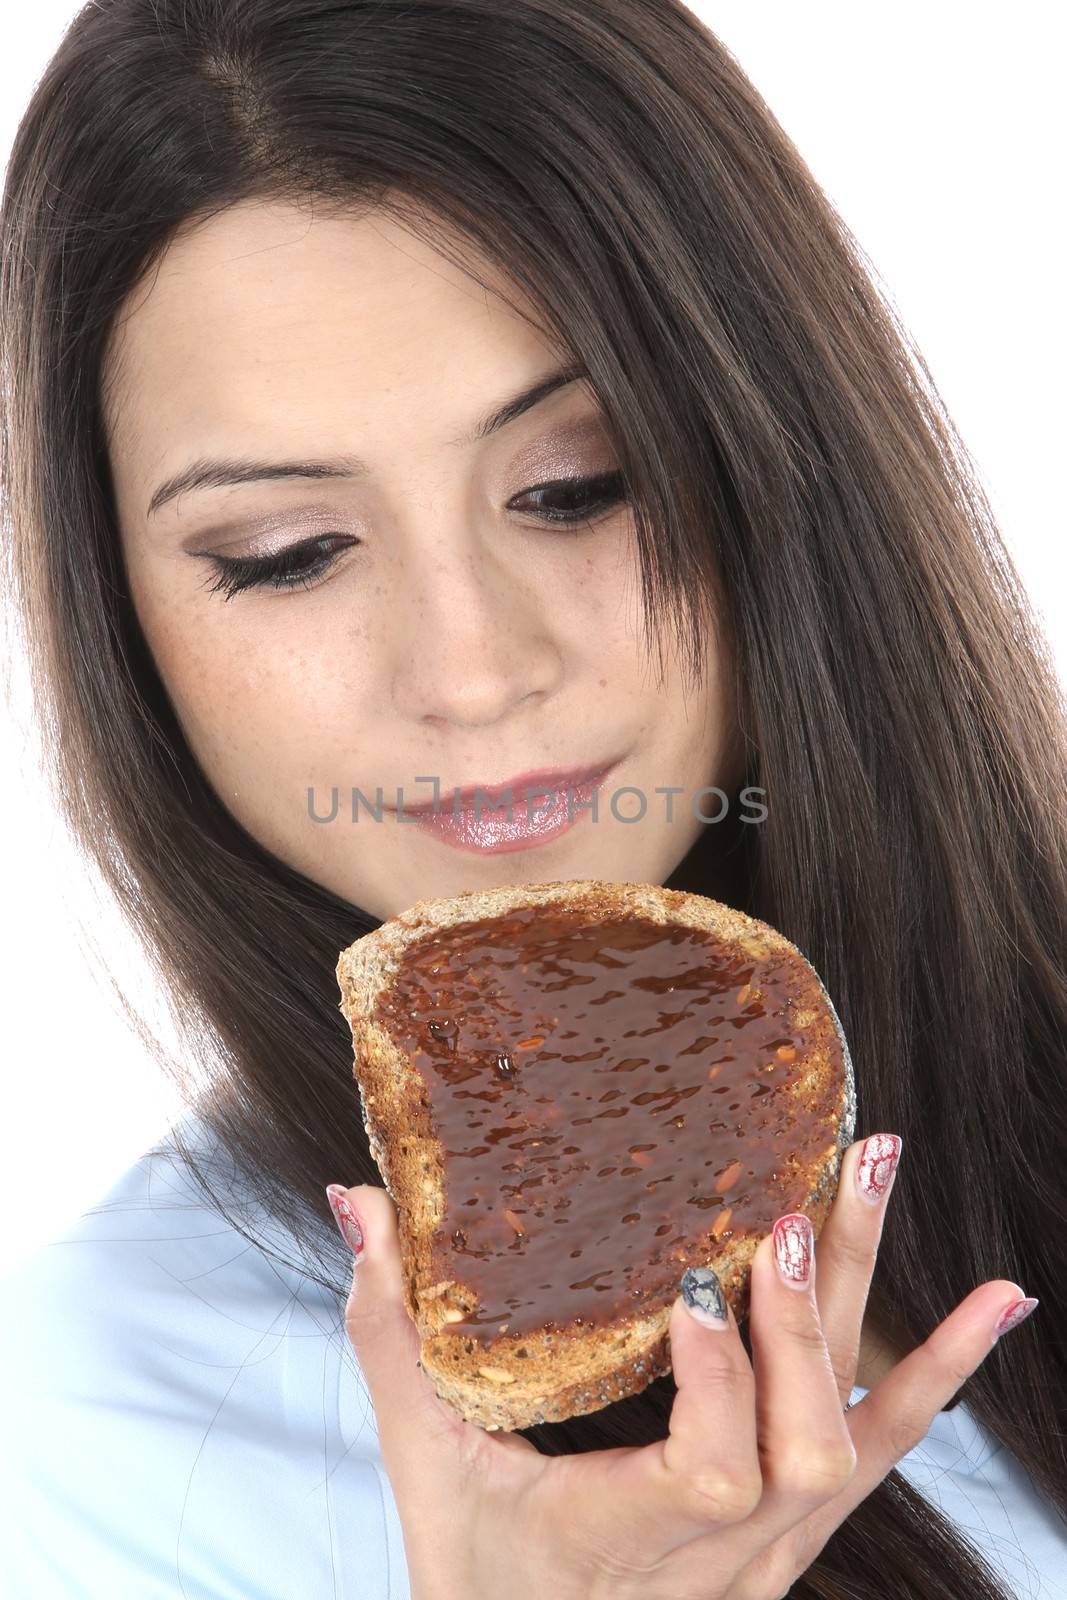 Model Released. Woman Eating Marmite on Toast